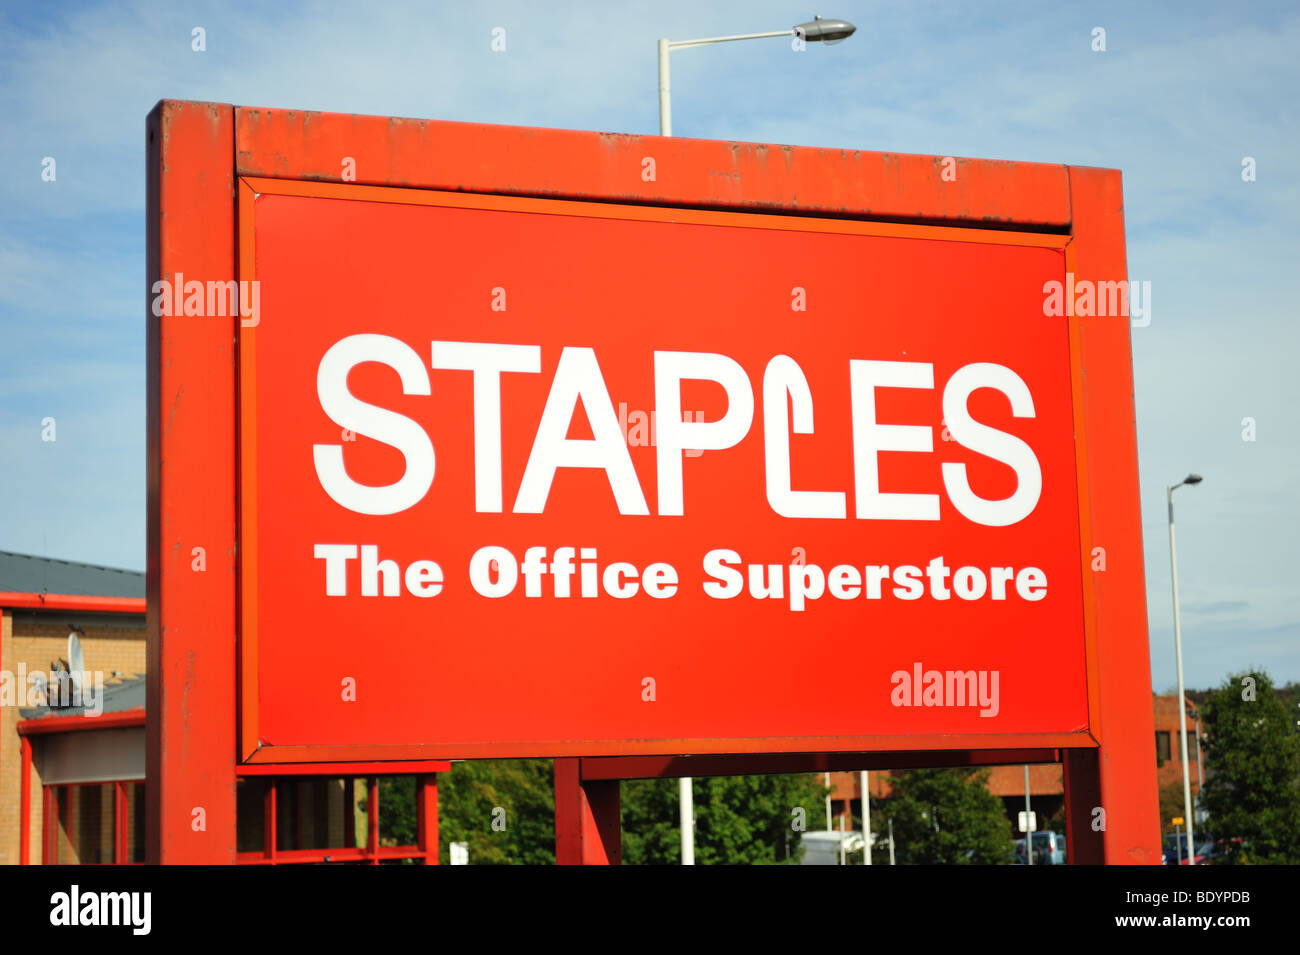 Staples Sign in Luton Stock Photo